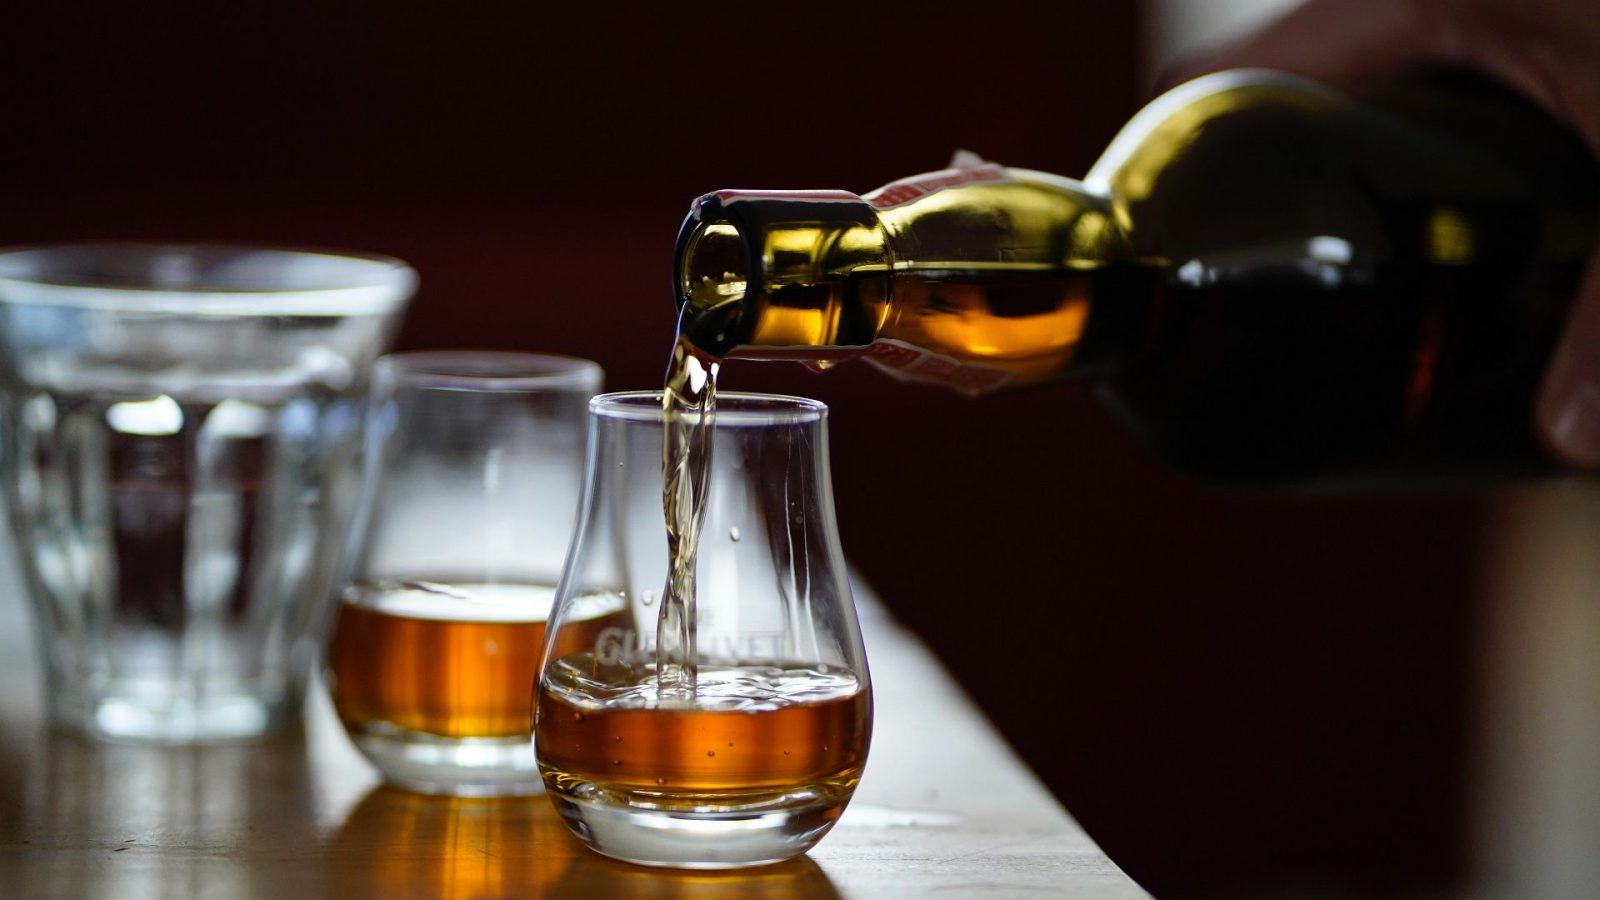 10 of the biggest scotch whisky-consuming countries around the world